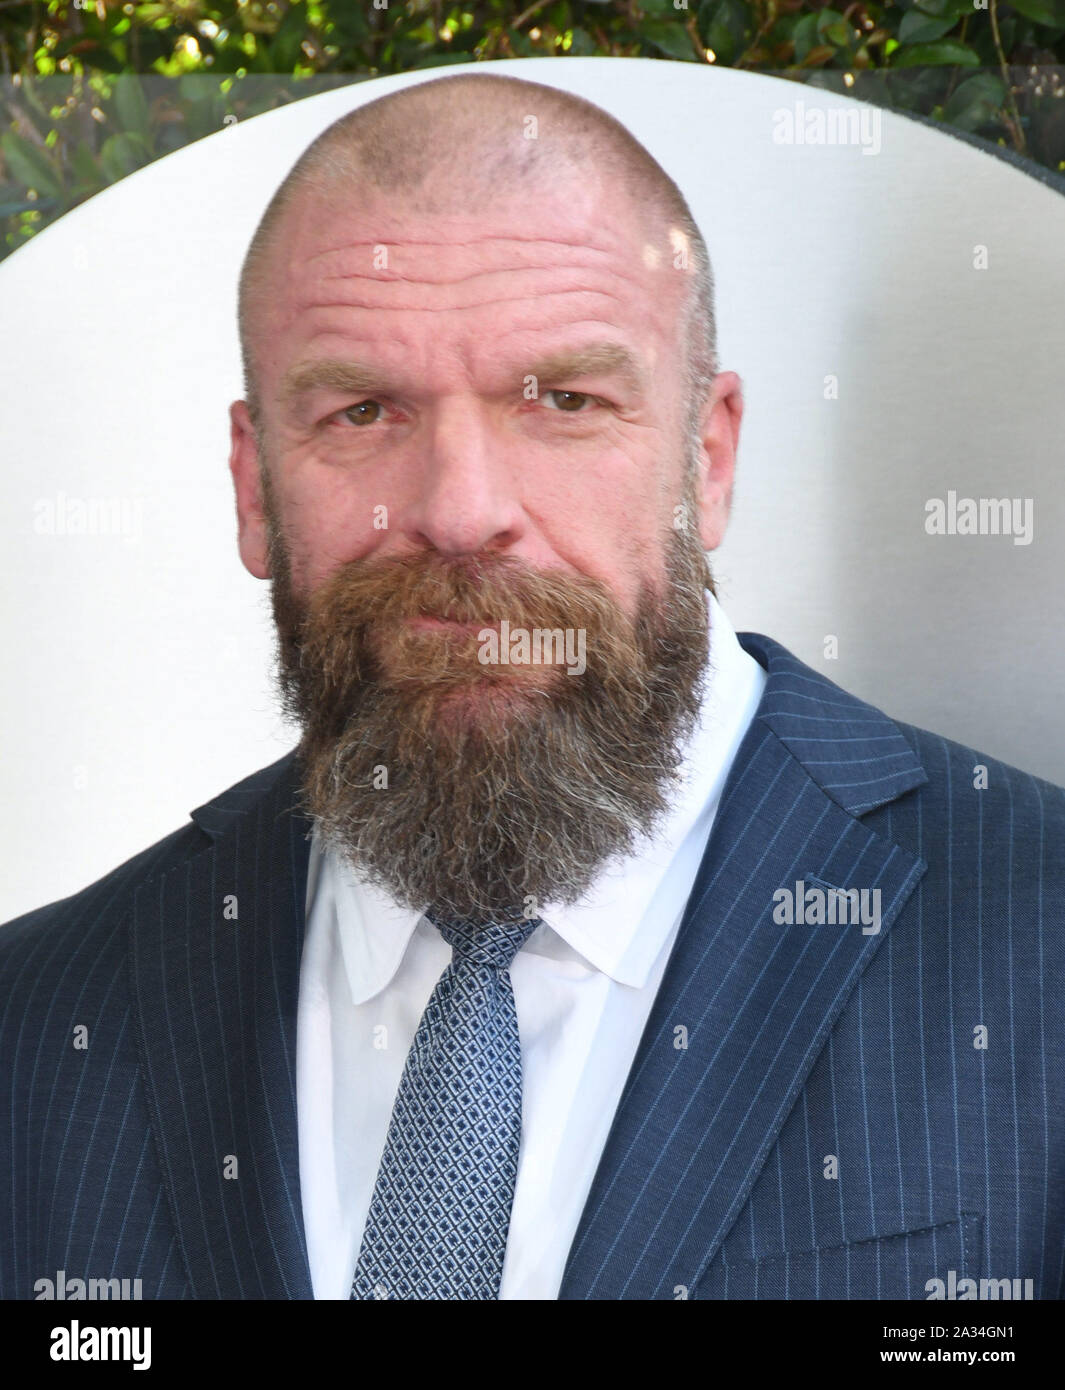 October 4, 2019, Los Angeles, California, USA: 04 October 2019 - Los Angeles, California - Paul Levesque, Triple H. WWE 20th Anniversary Celebration Marking Premiere Of WWE Friday Night SmackDown On FOX held at Staples Center. Photo Credit: Birdie Thompson/AdMedia (Credit Image: © Birdie Thompson/AdMedia via ZUMA Wire) Stock Photo